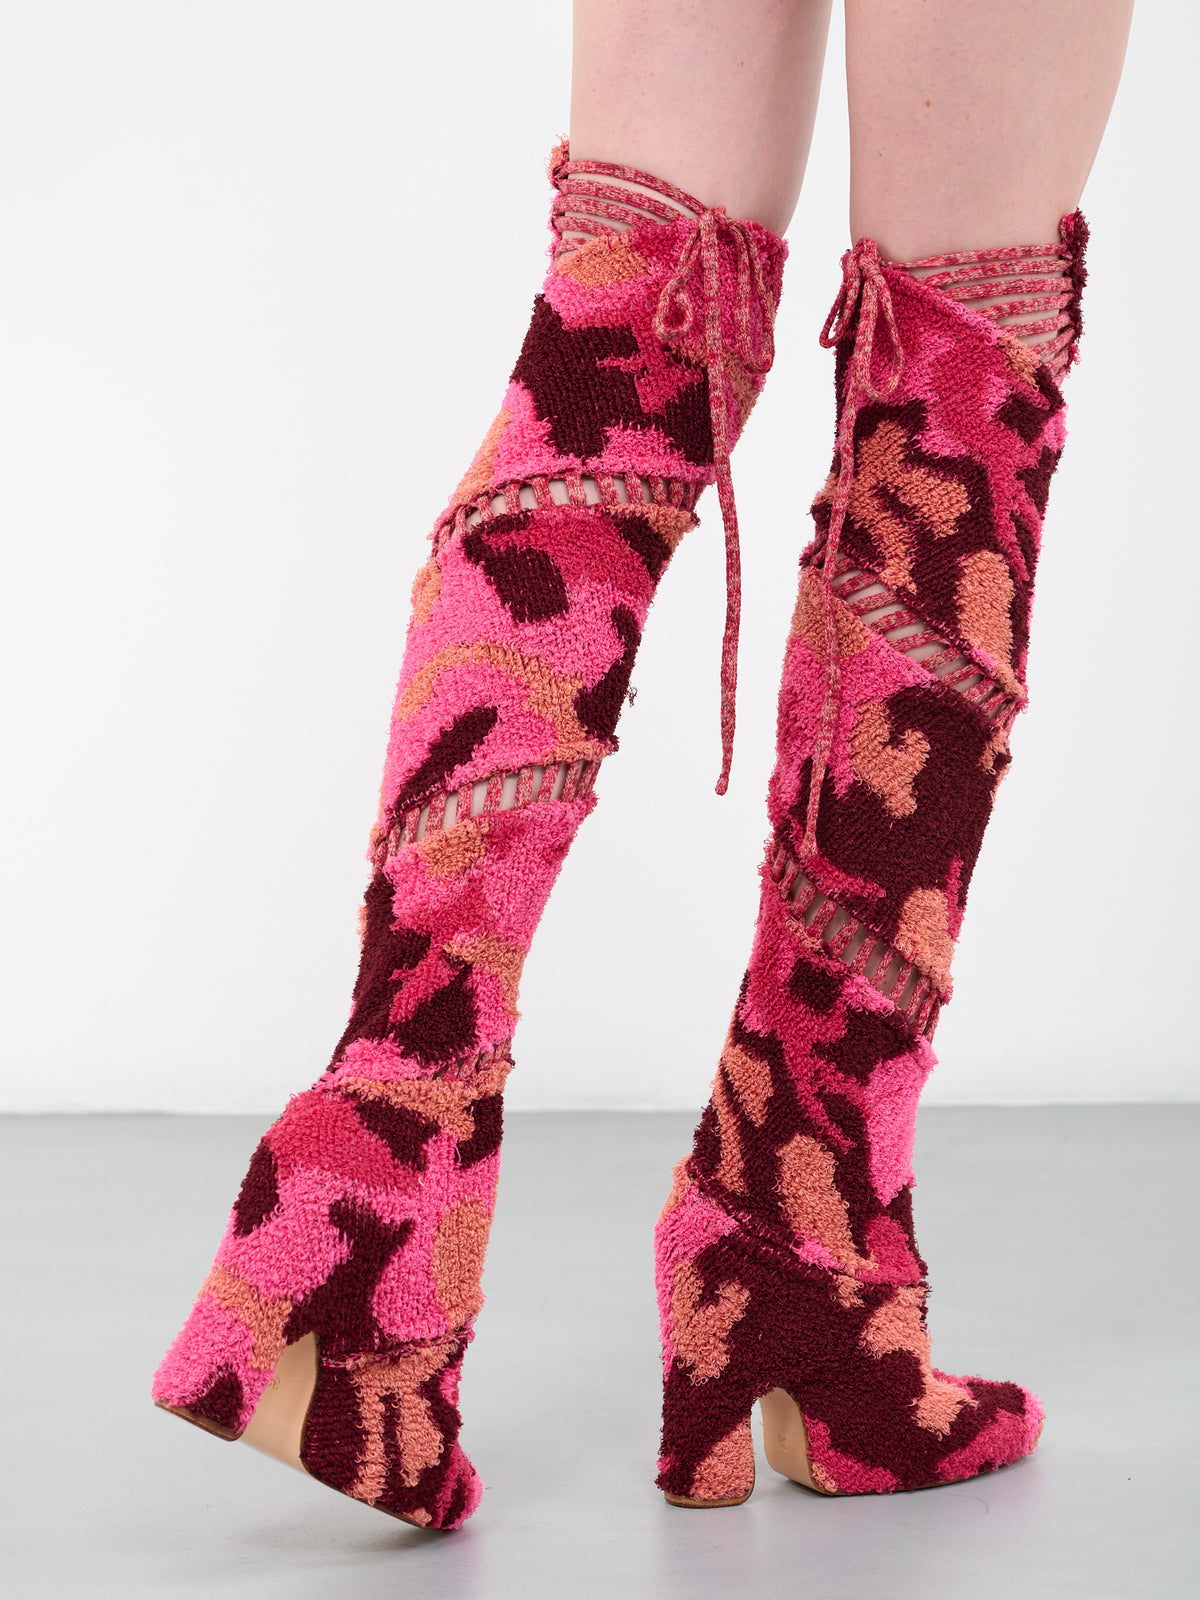 Knee-High Knit Boots (23SH02-CAMOPINK)